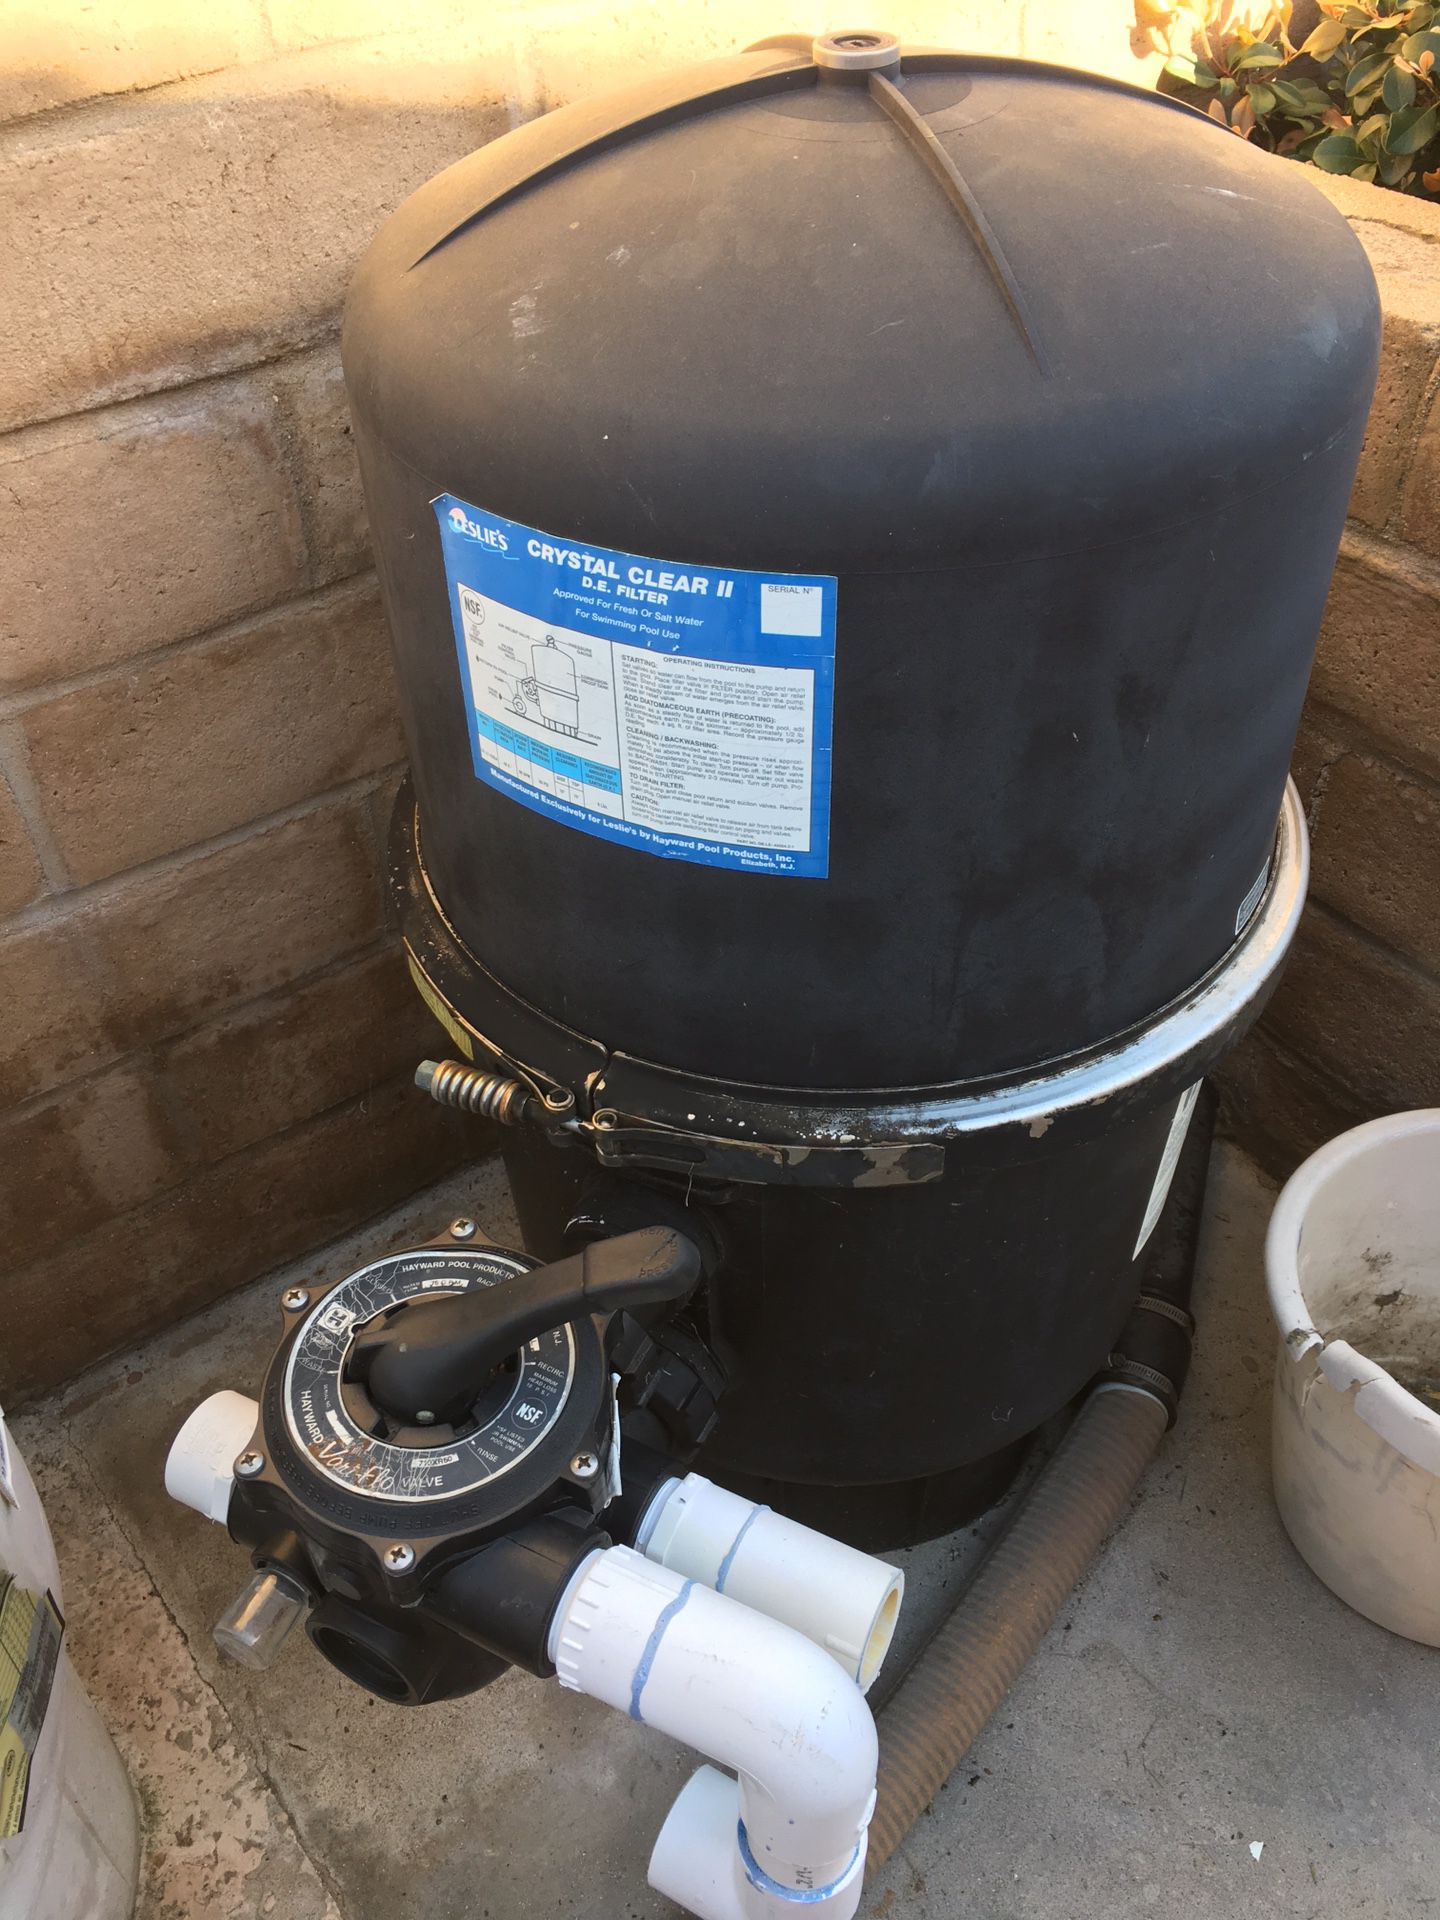 Pool Filter and valve Leslie’s Crystal Clear II